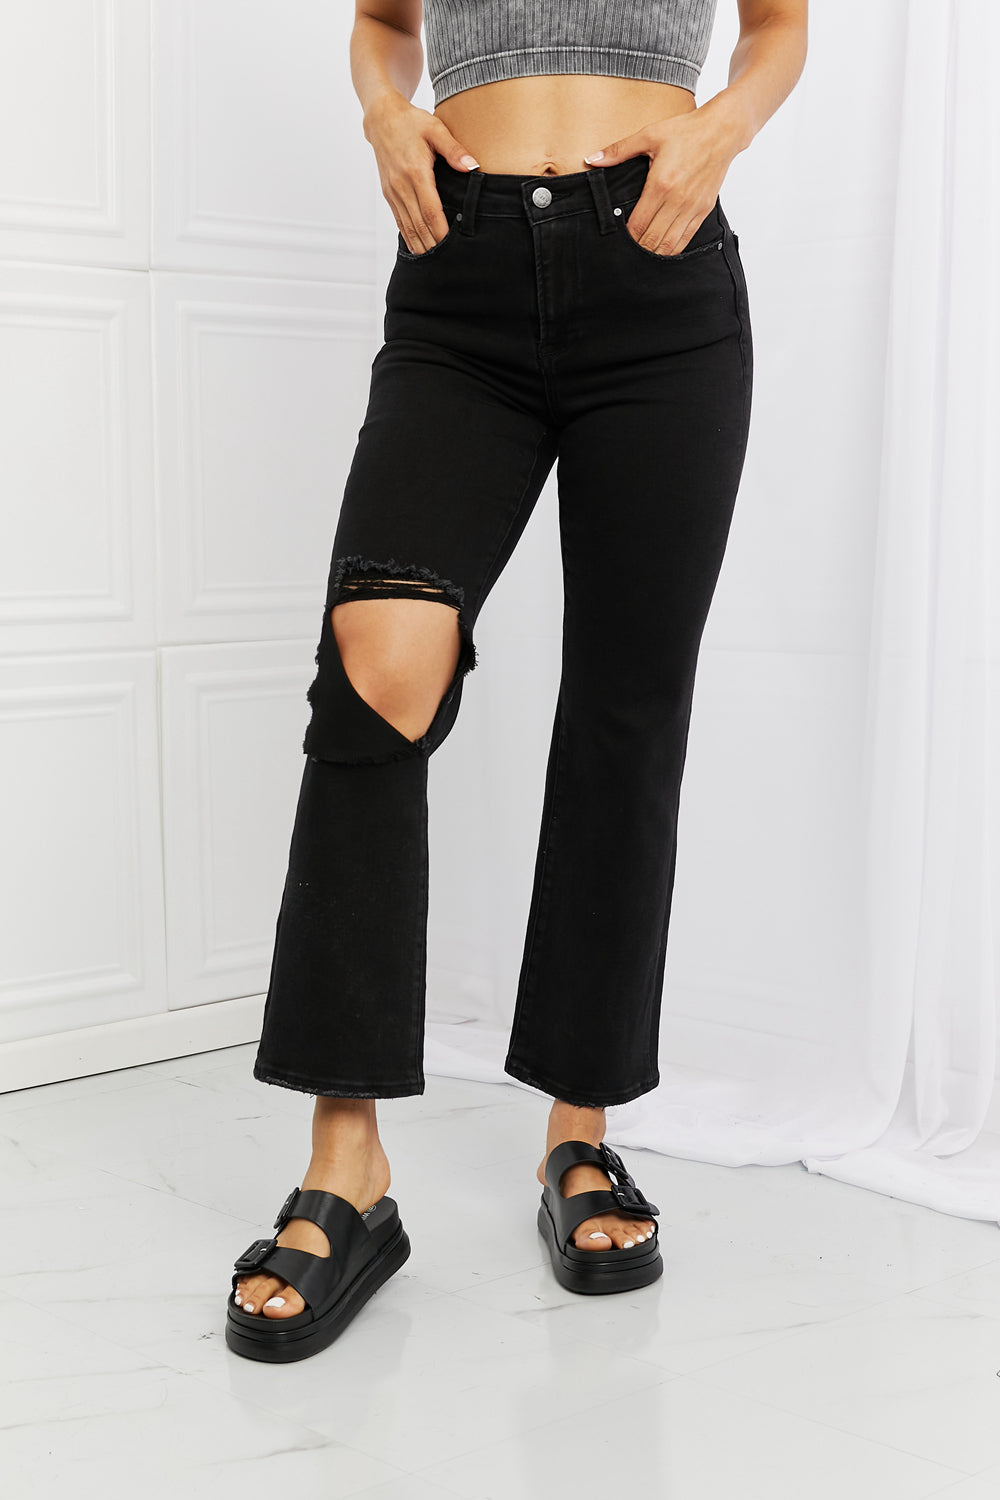 DARK - RISEN Full Size Yasmin Relaxed Distressed Jeans - Ships from The US - womens jeans at TFC&H Co.